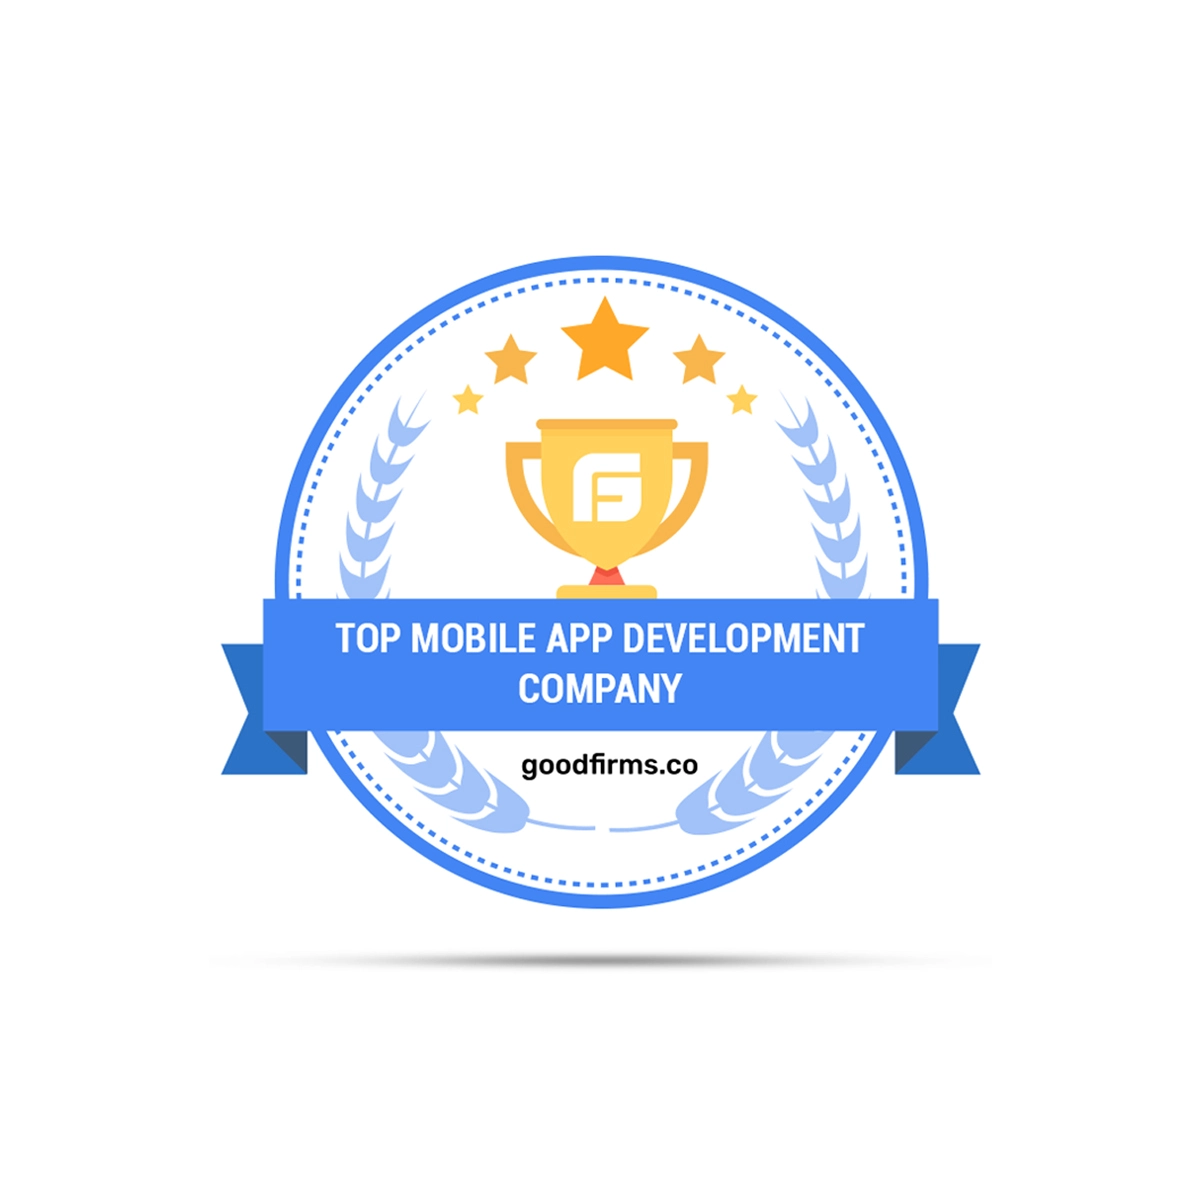 best mobile app development companies listed by goodfirms